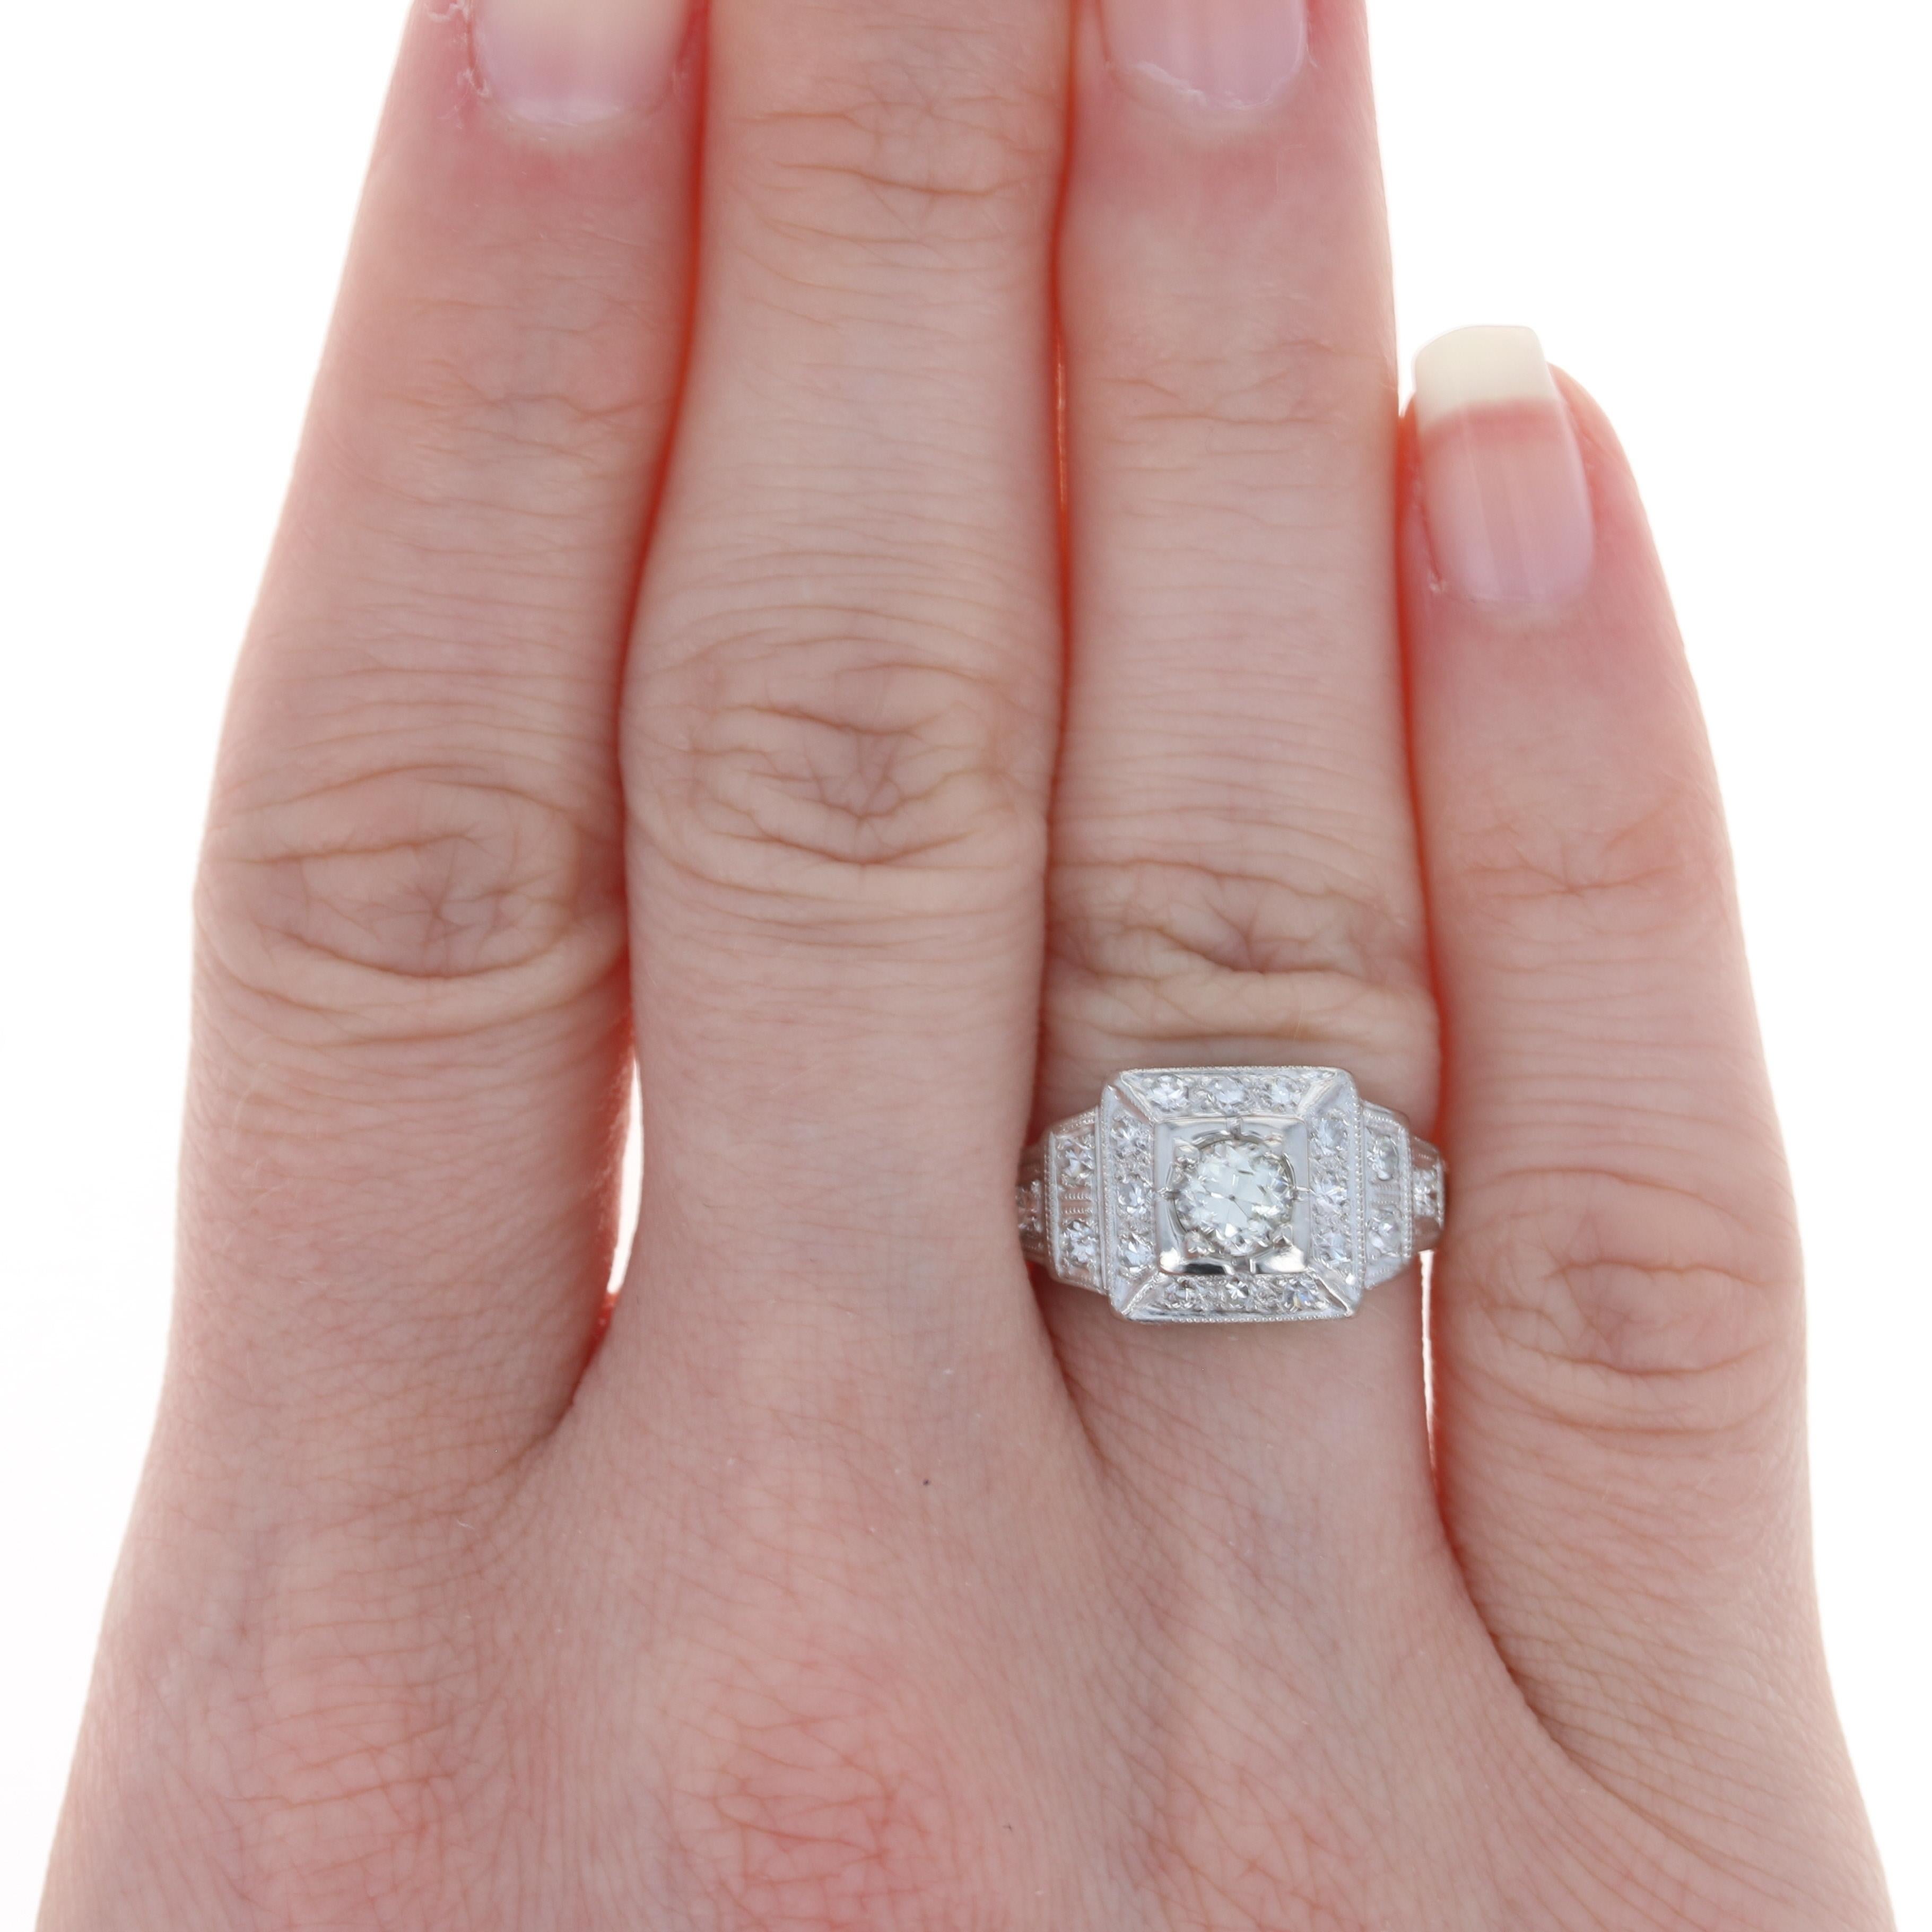 Size: 5
 Sizing Fee: Down 1 size for $30 or Up 2 sizes for $40
 
 Era: Art Deco 1920s - 1930s
 
 Metal Content: Platinum
 
 Stone Information: 
 Natural Diamond Solitaire
 Carat: .45ct
 Cut: Old European
 Color: K
 Clarity: VS2
 
 Natural Diamond